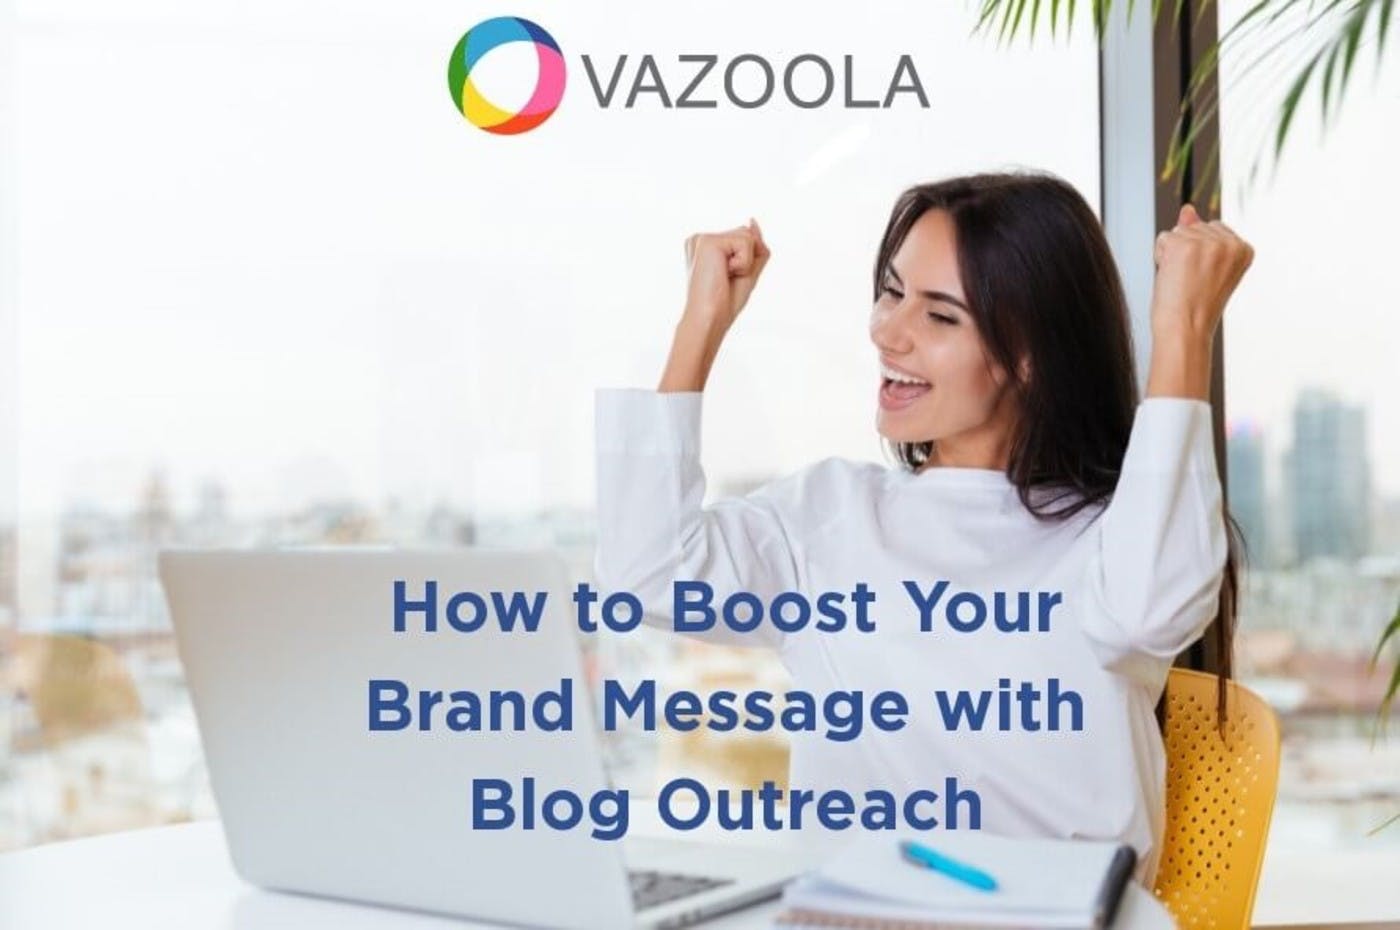 How to Boost Your Brand Message with Blog Outreach